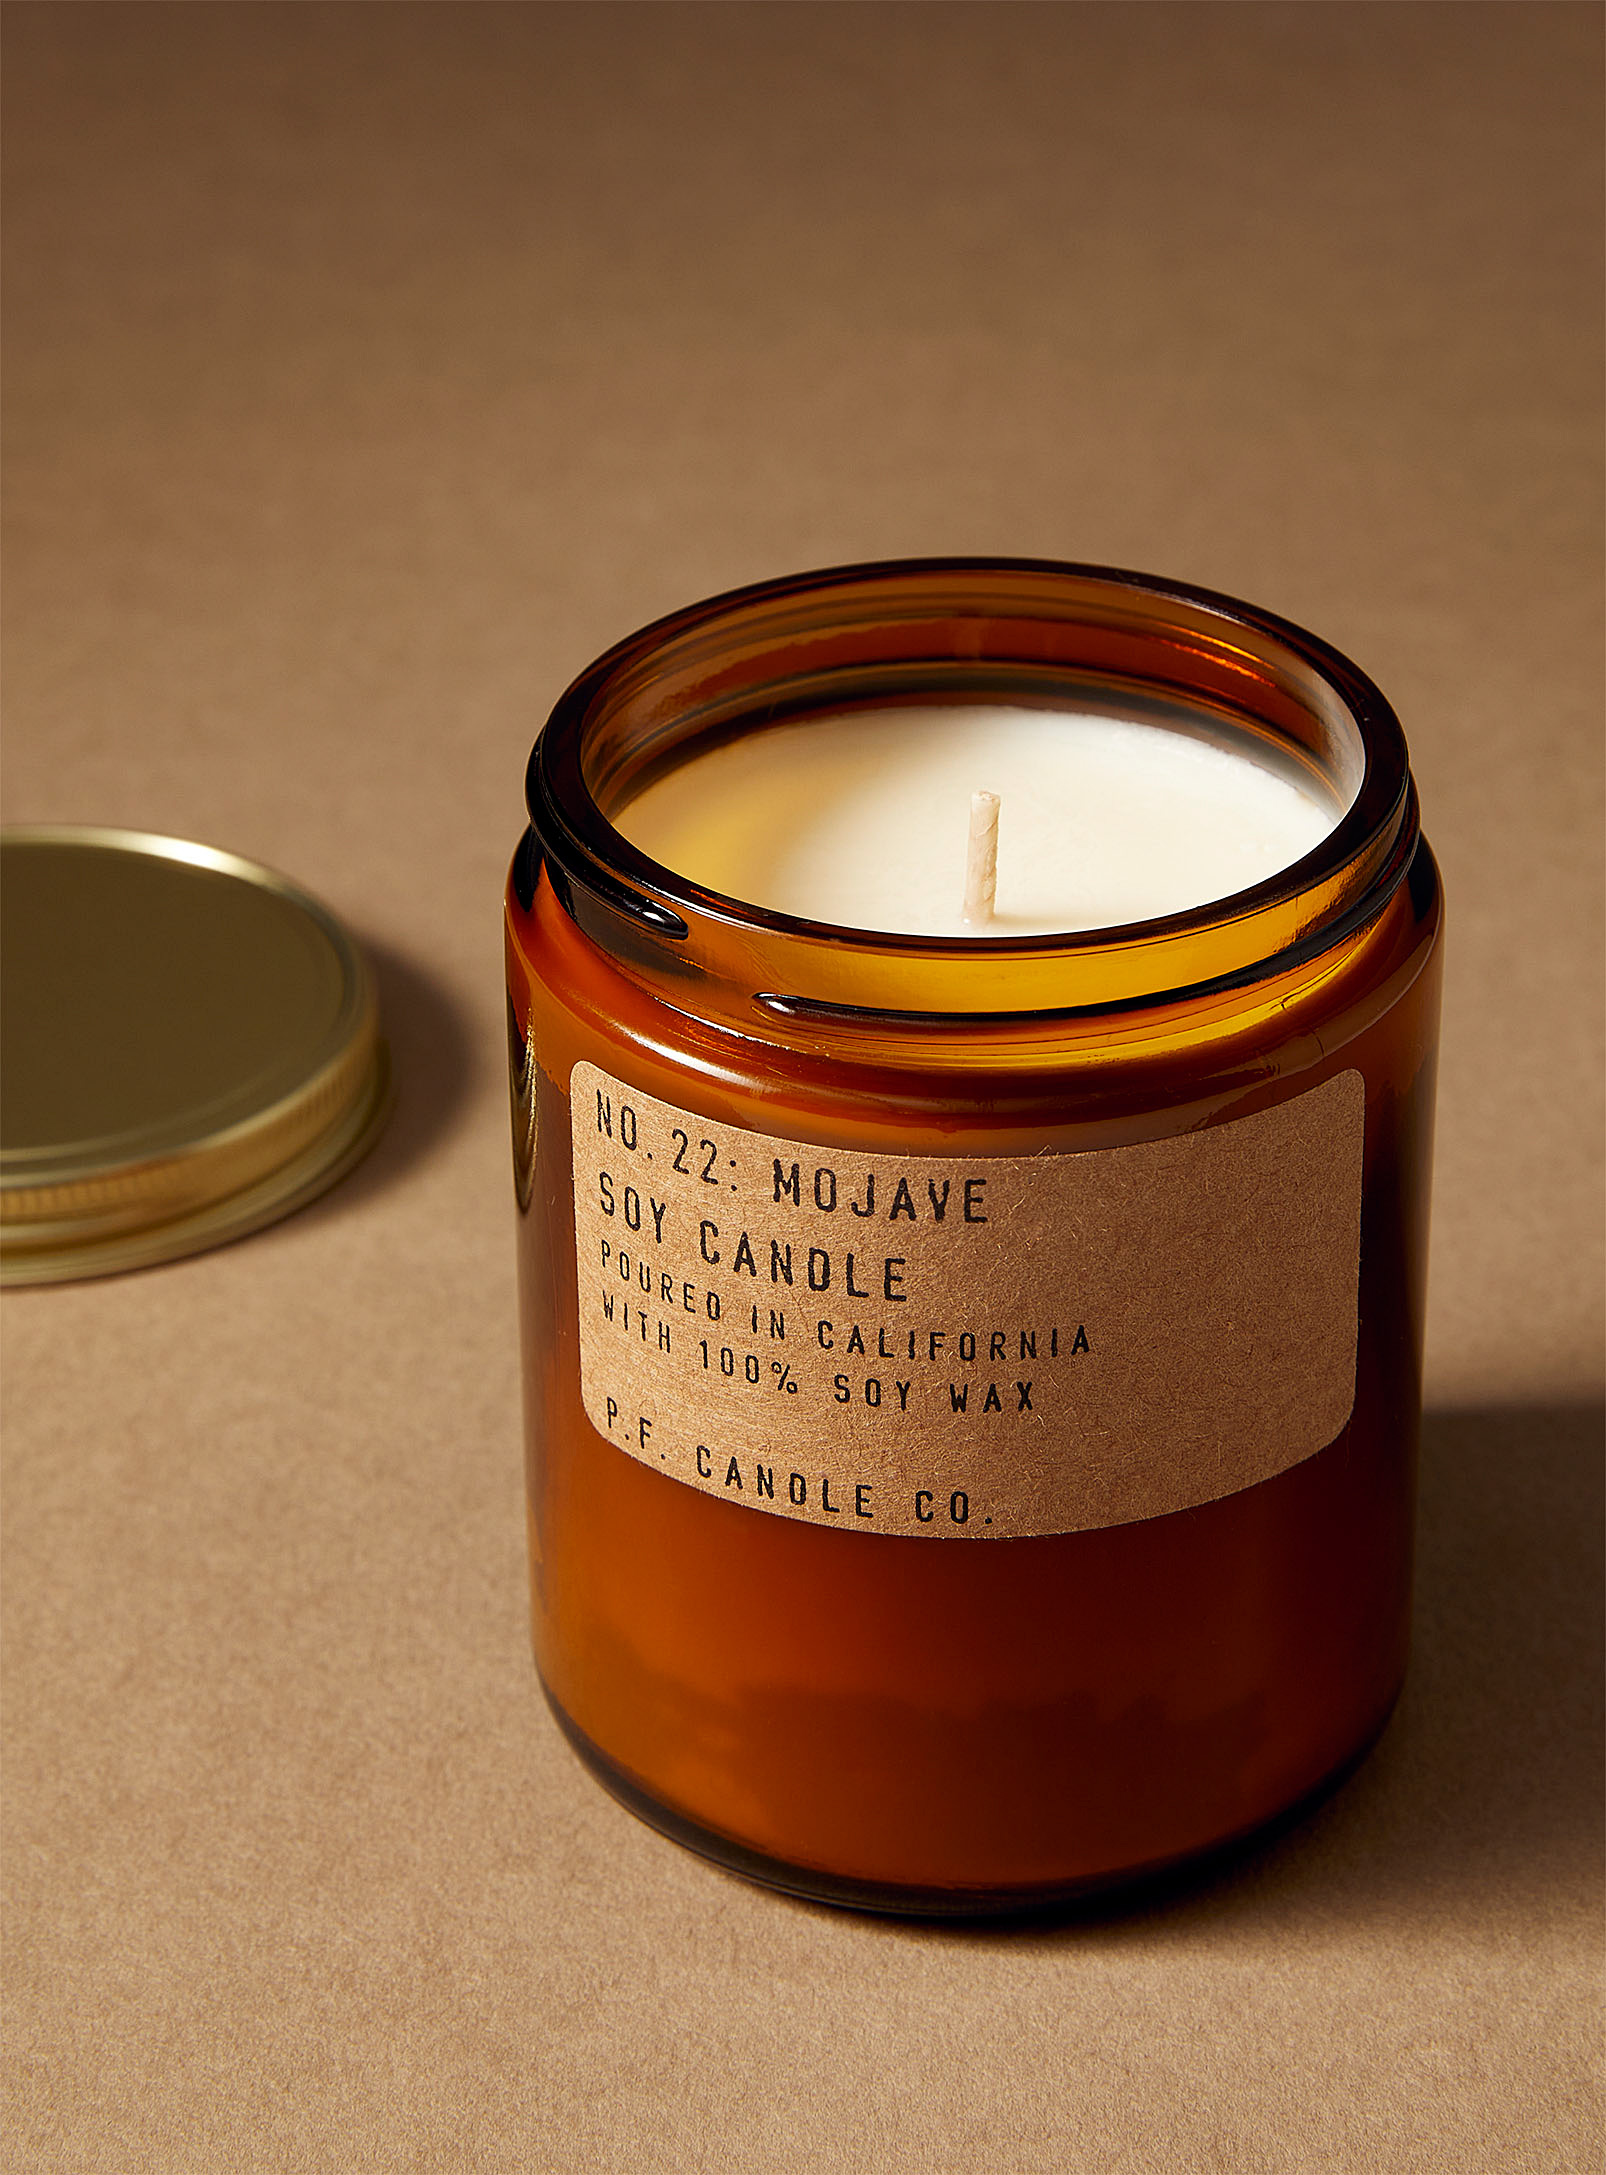 P.F. Candle Co. - Mojave scented candle